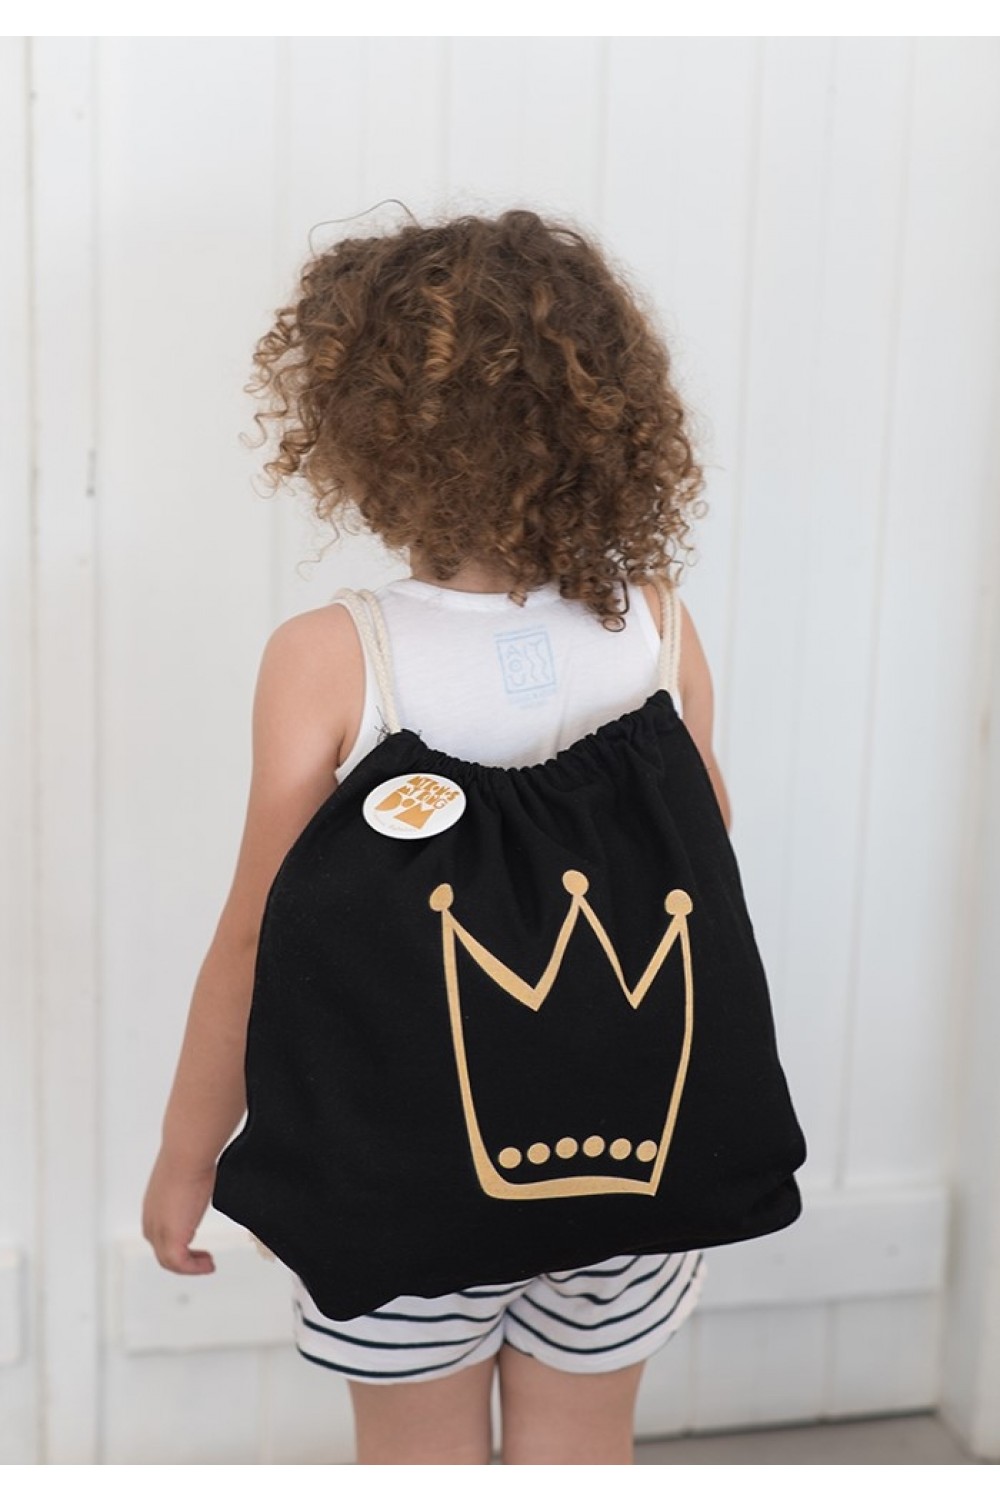 THE "CROWN" POUCH IN BLACK 